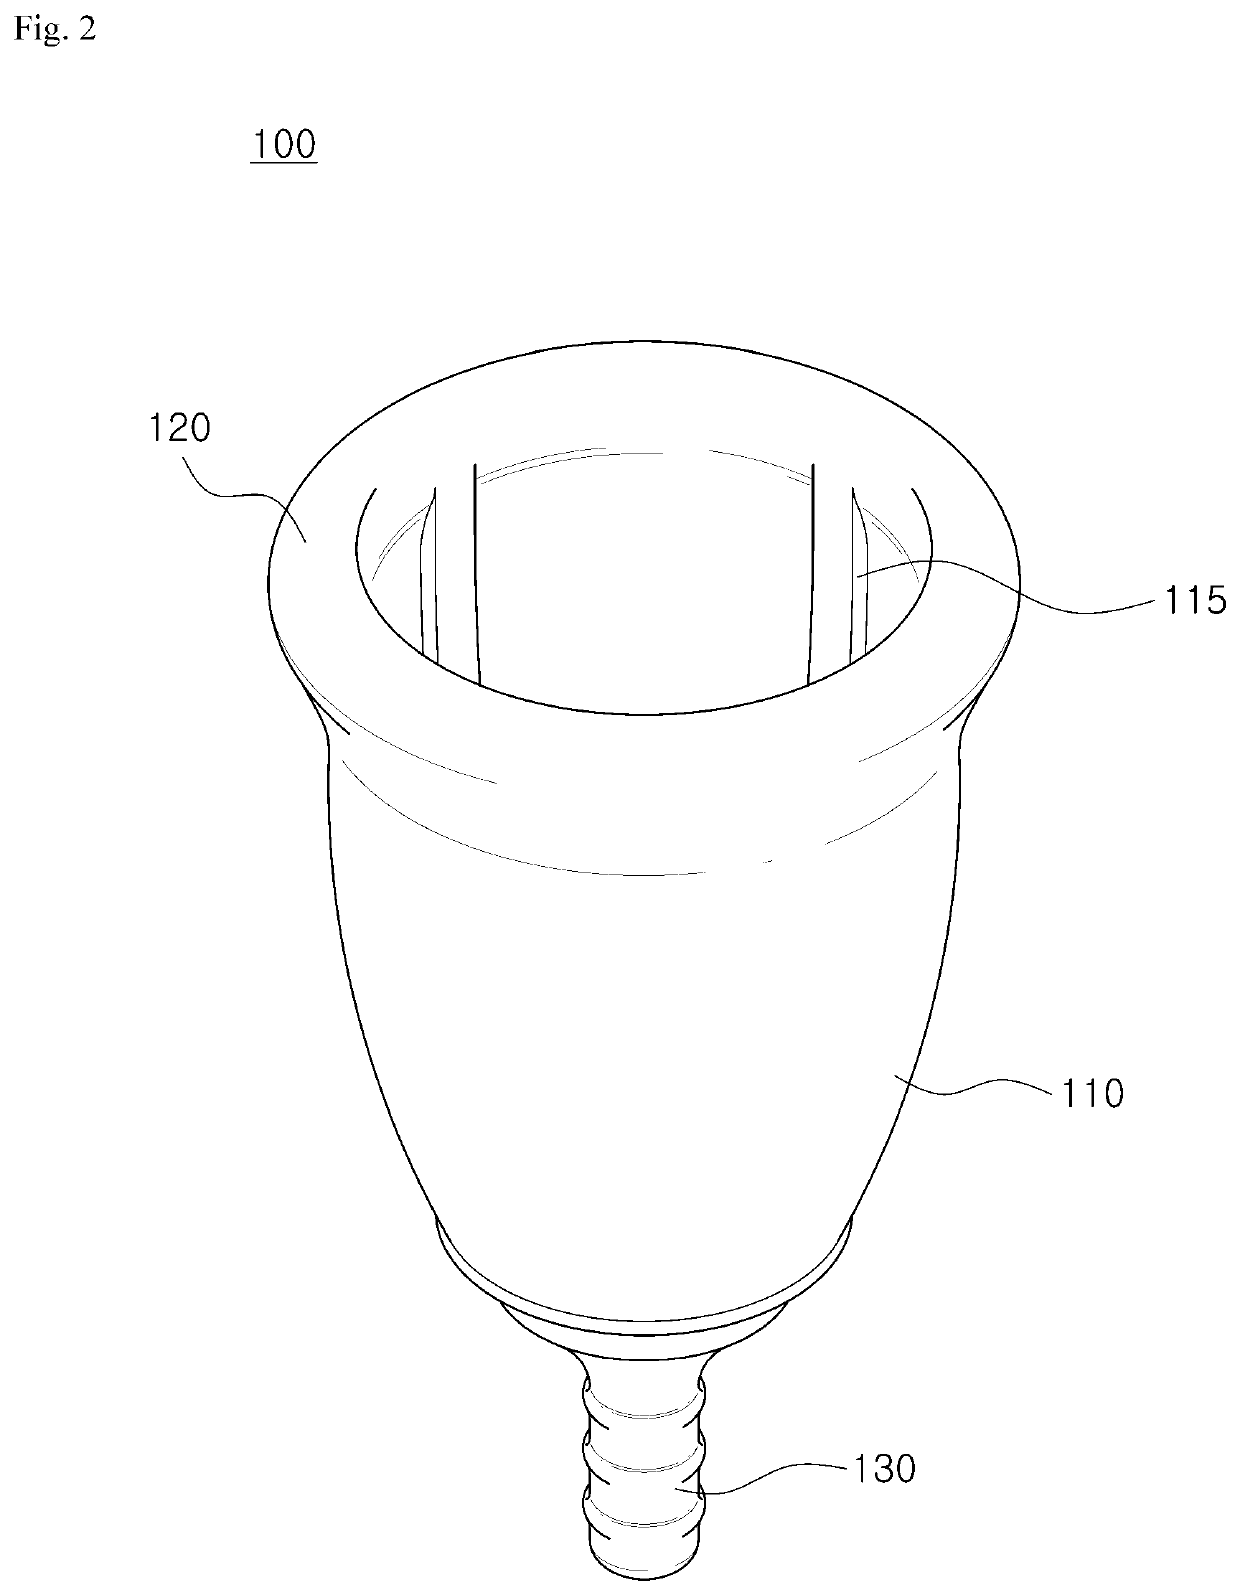 Easily inserted menstrual cup